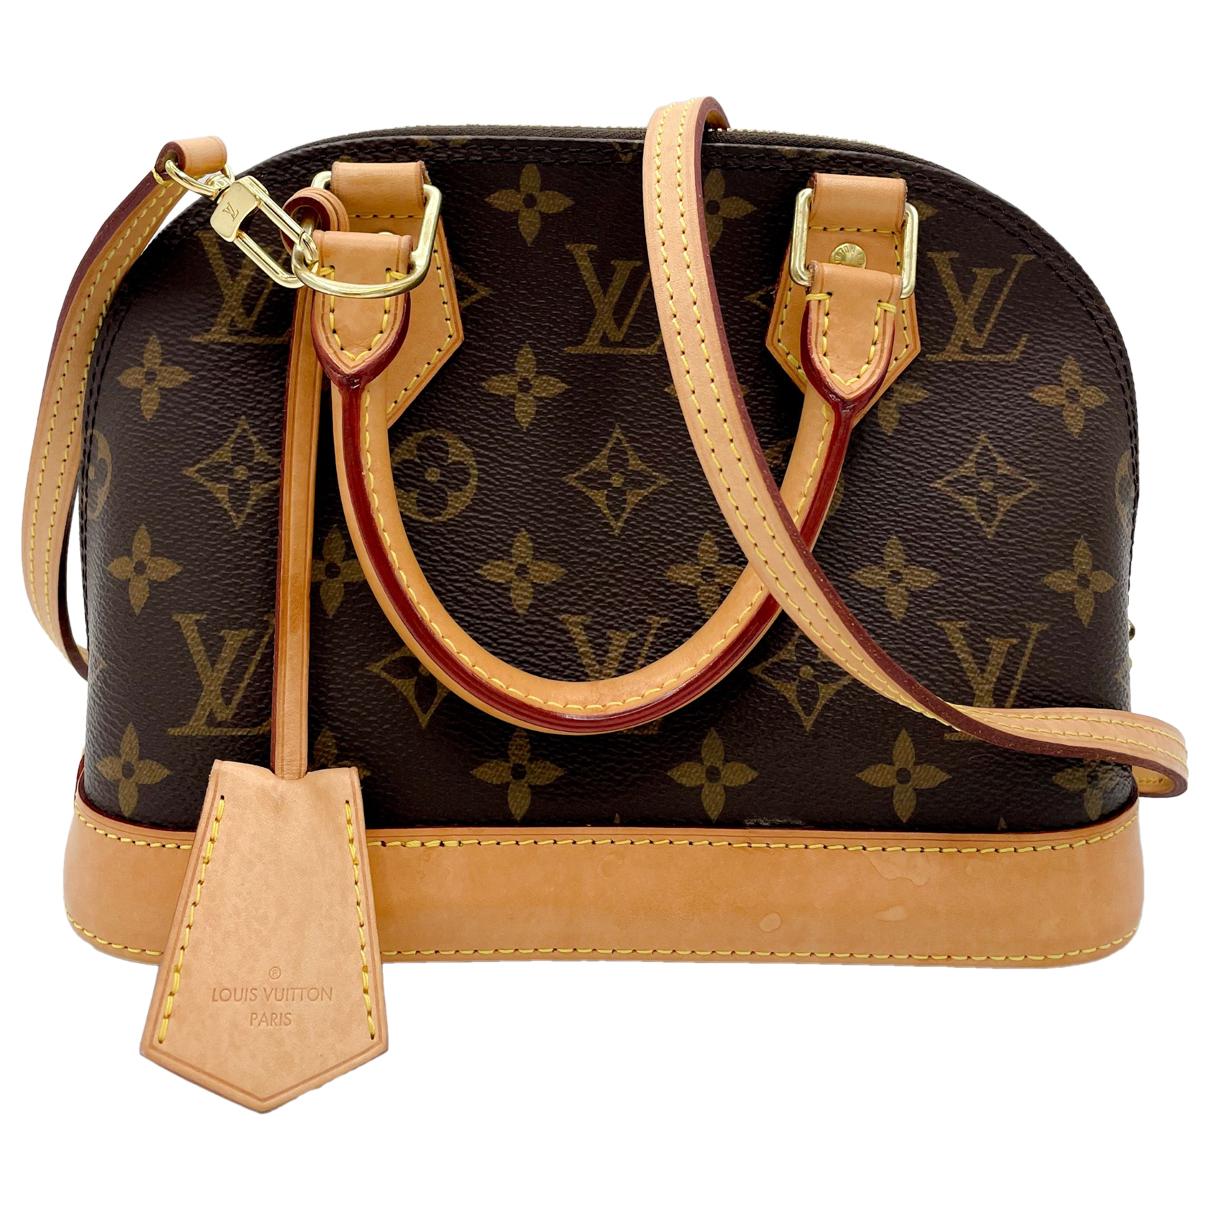 Alma leather handbag Louis Vuitton Gold in Leather - 37584874